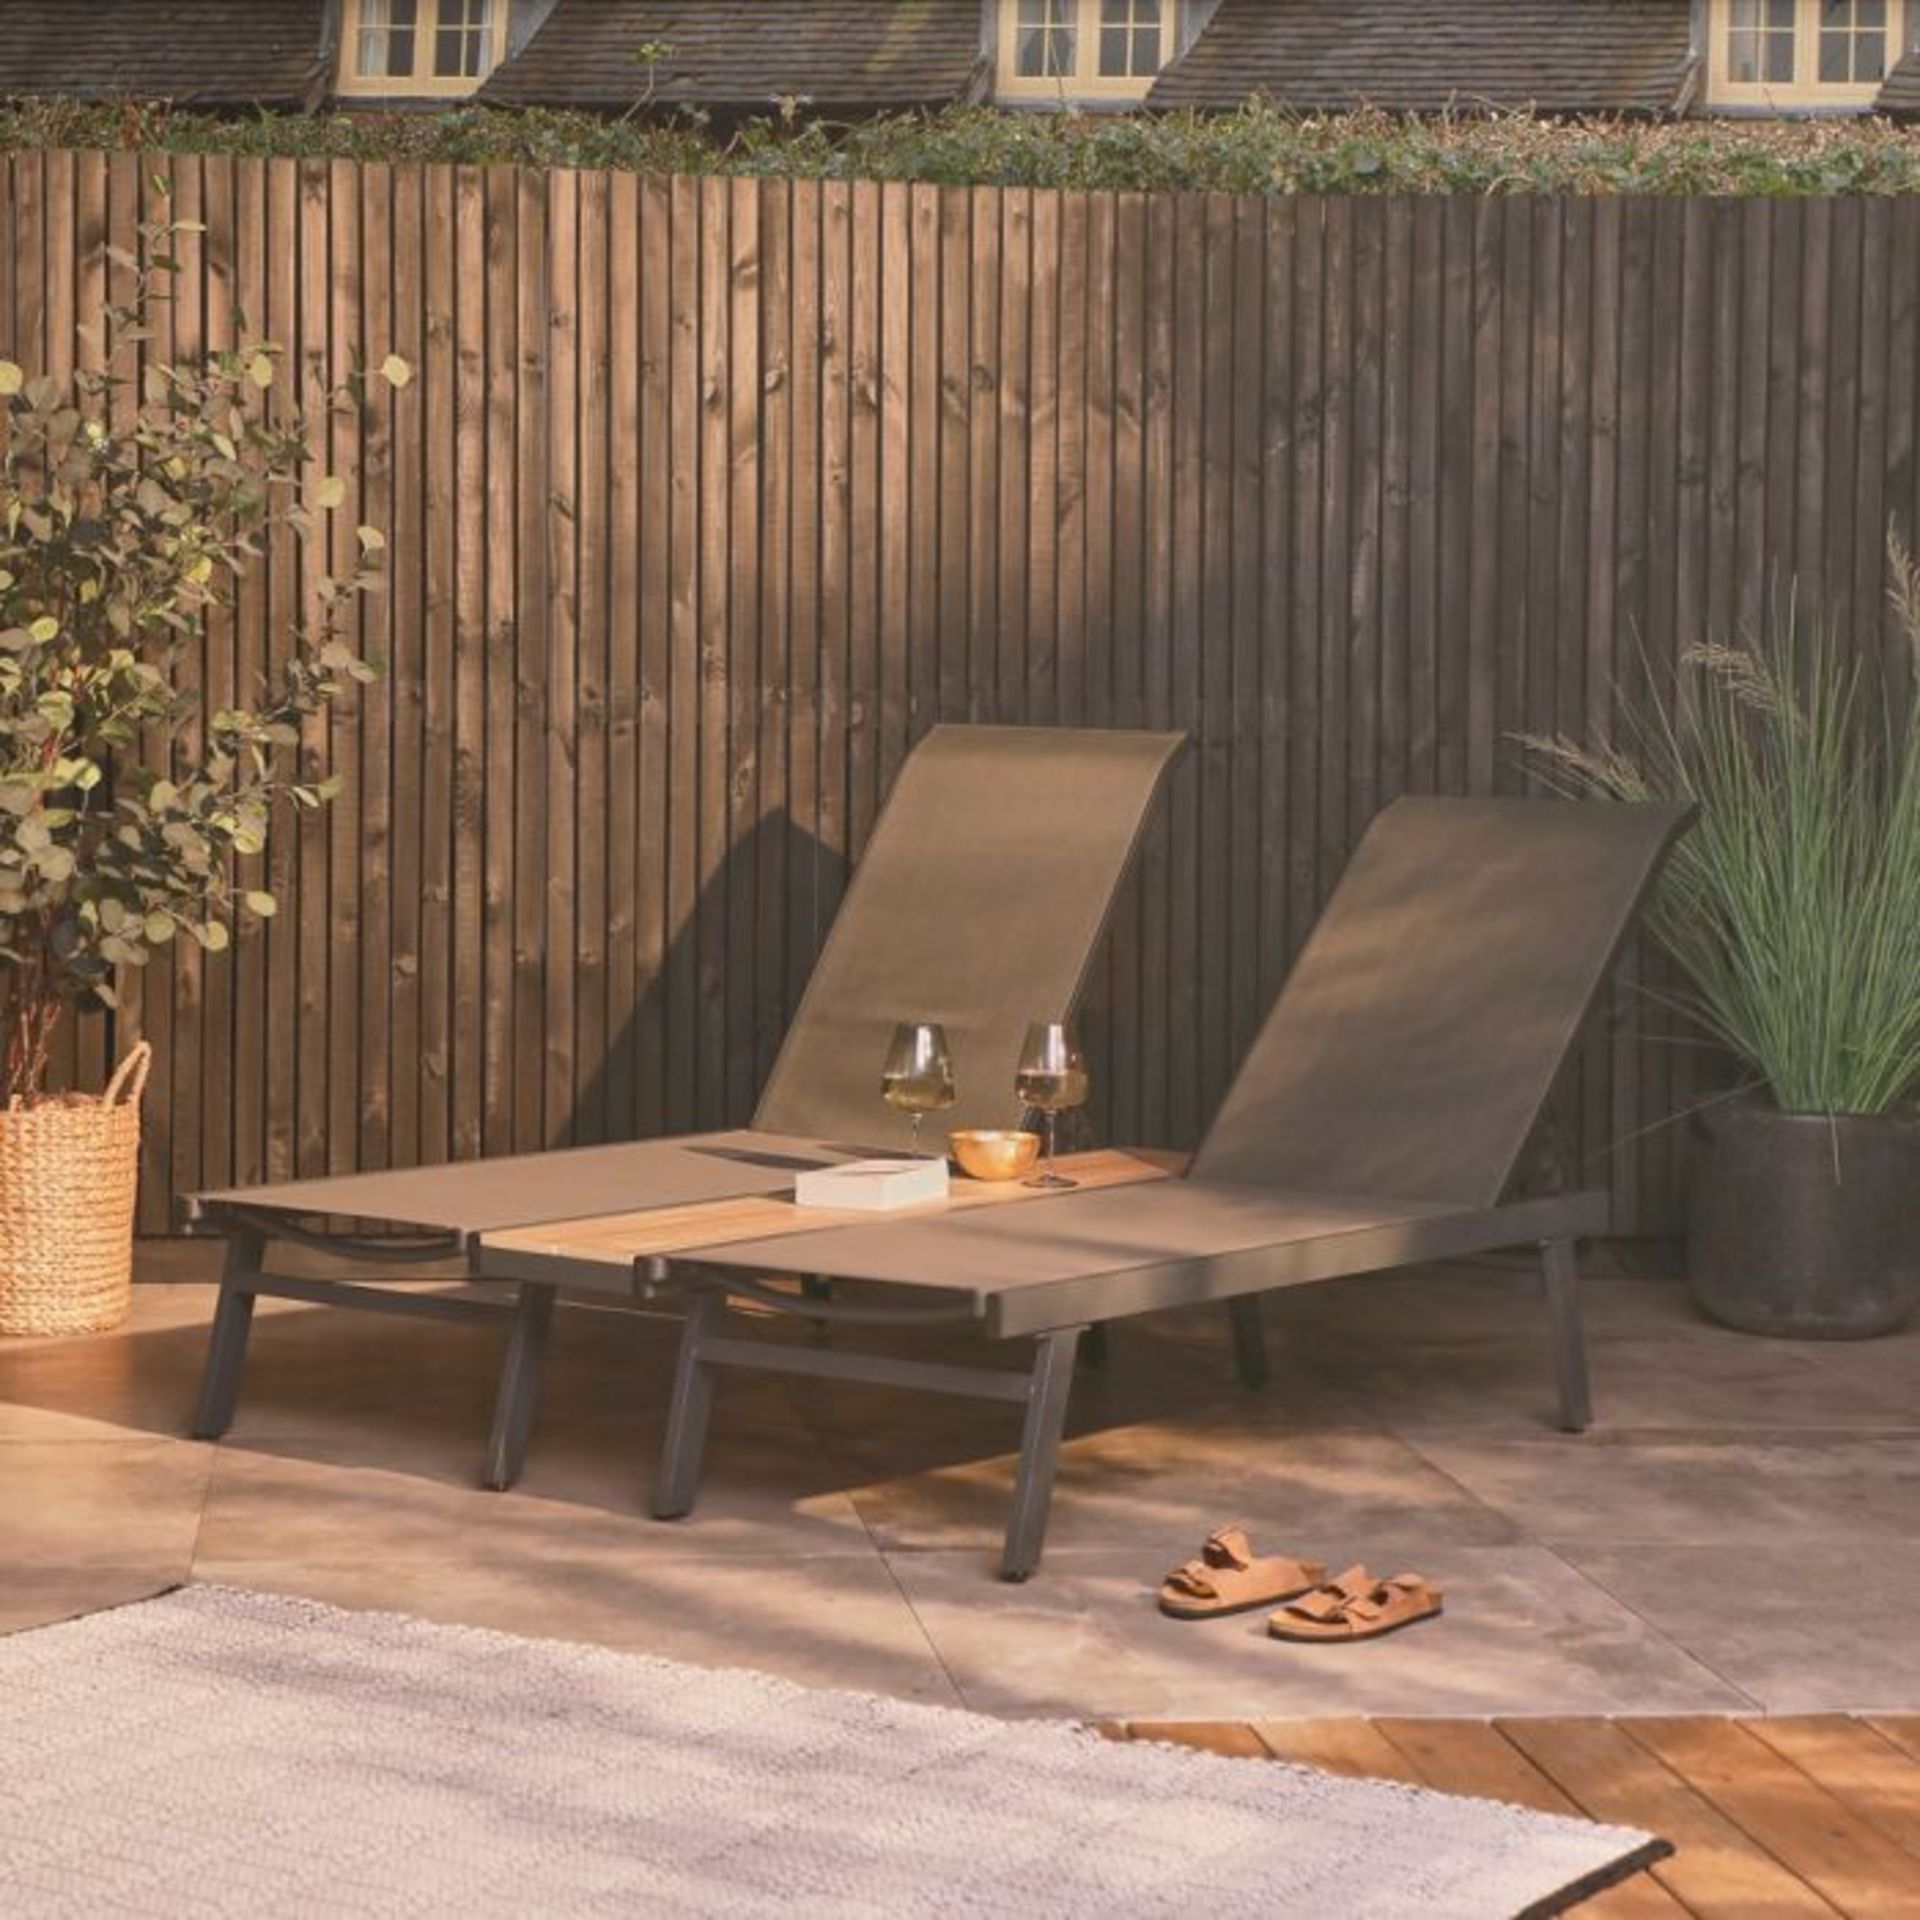 Duo Reclining Sun Lounger Set. Relax in comfort during those sunny days with our Duo Lounger